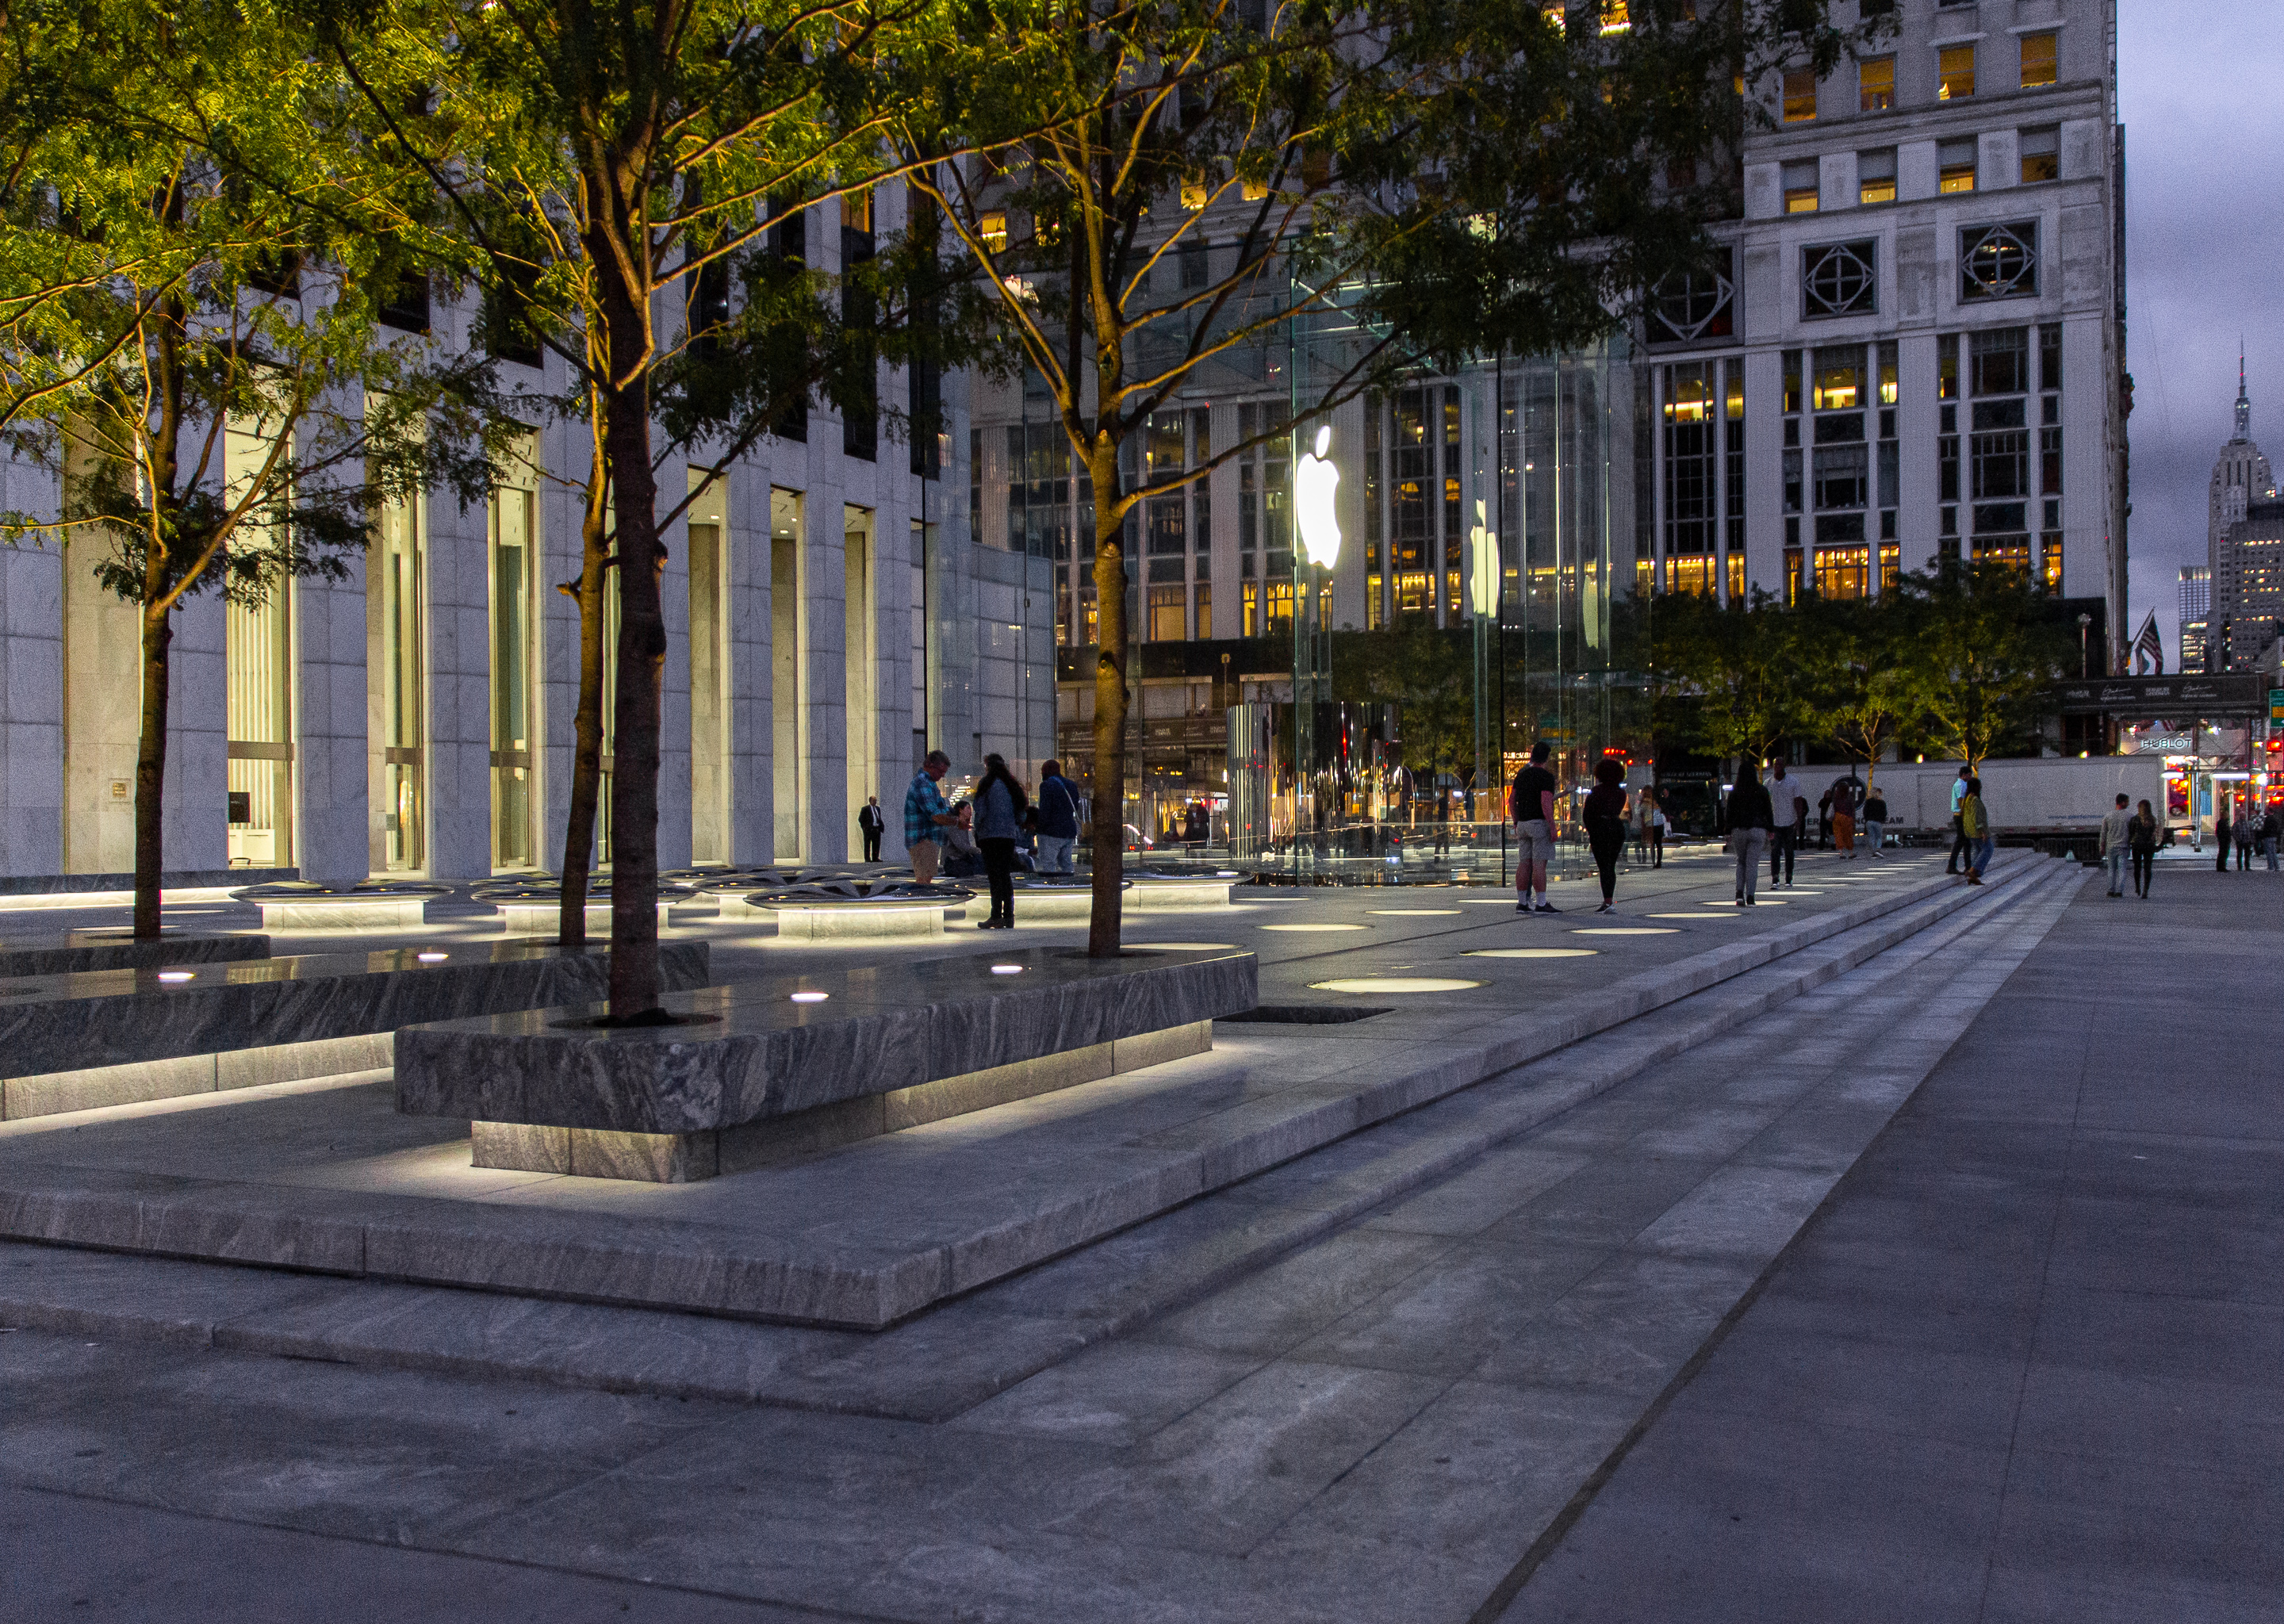 ▷ Check out the new Apple Store on 5th Avenue in NYC!